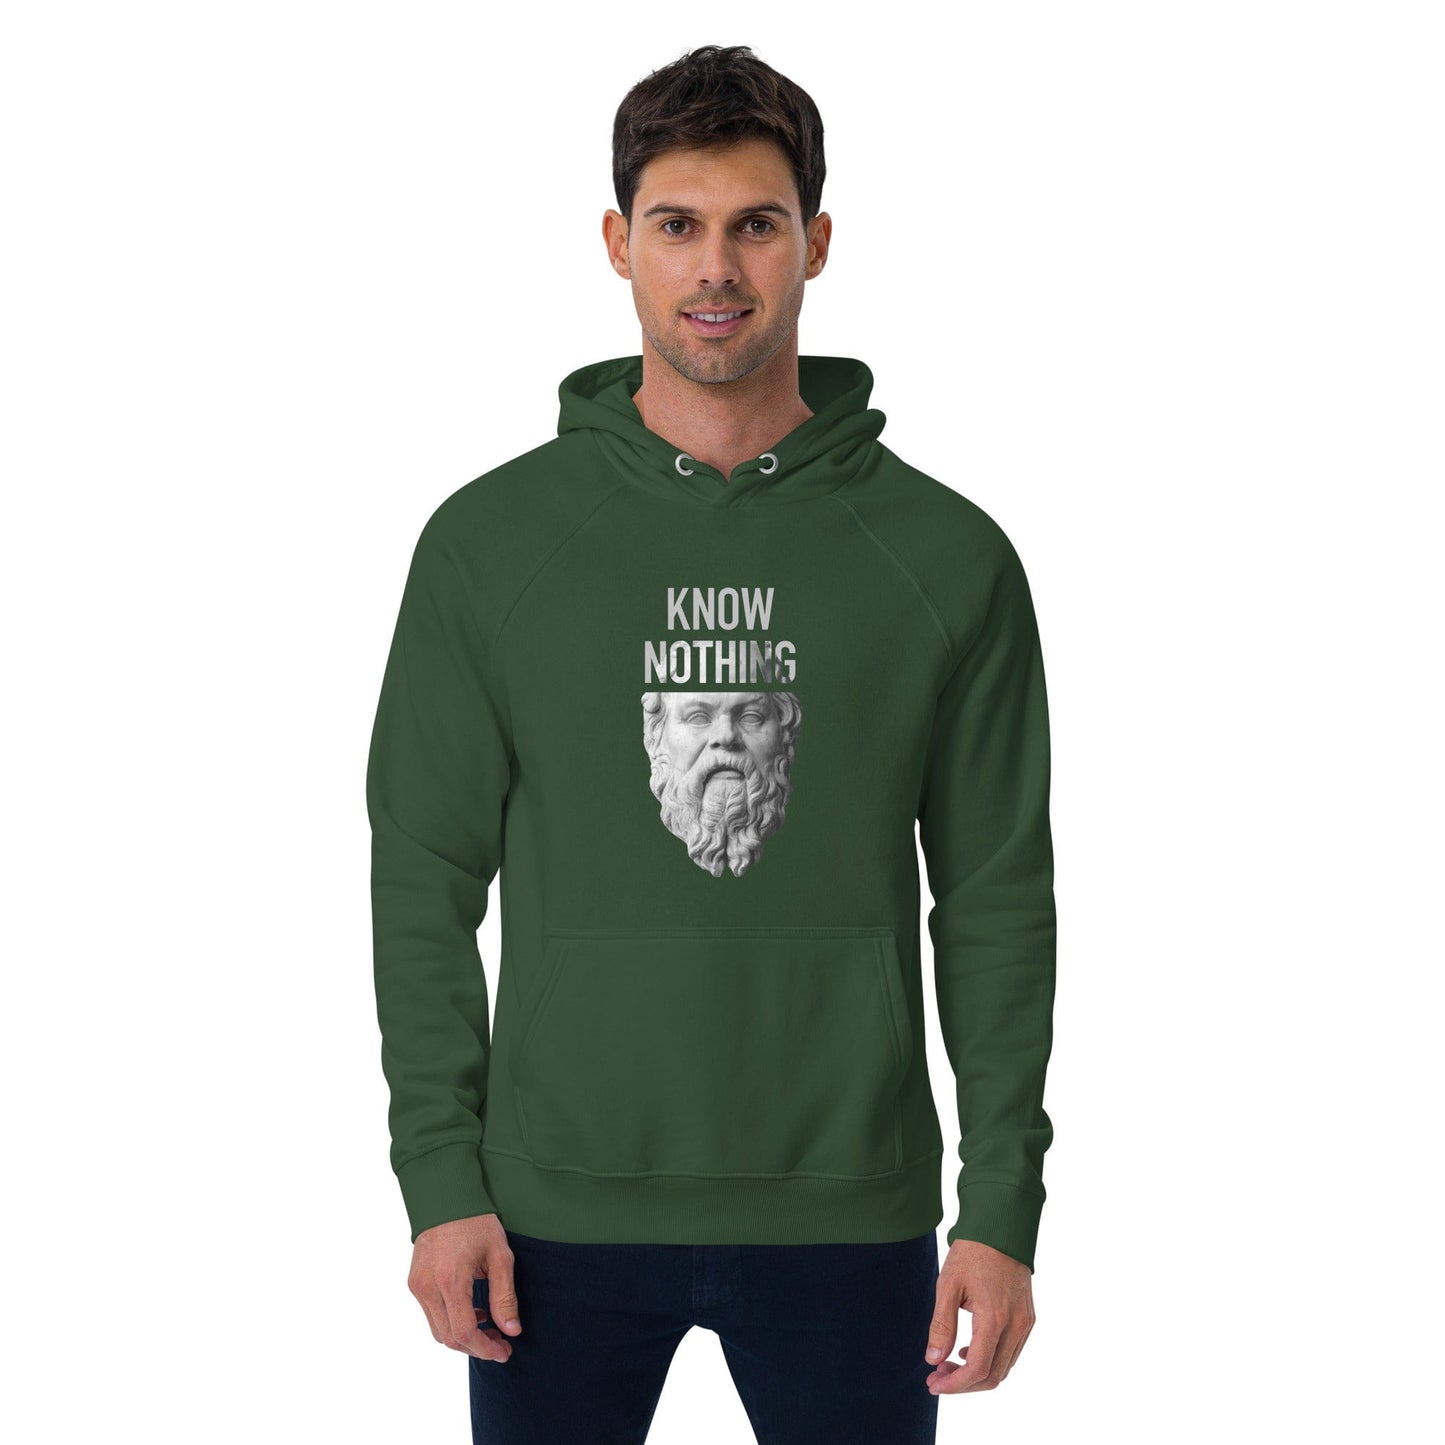 Socrates - Know Nothing - Eco Hoodie